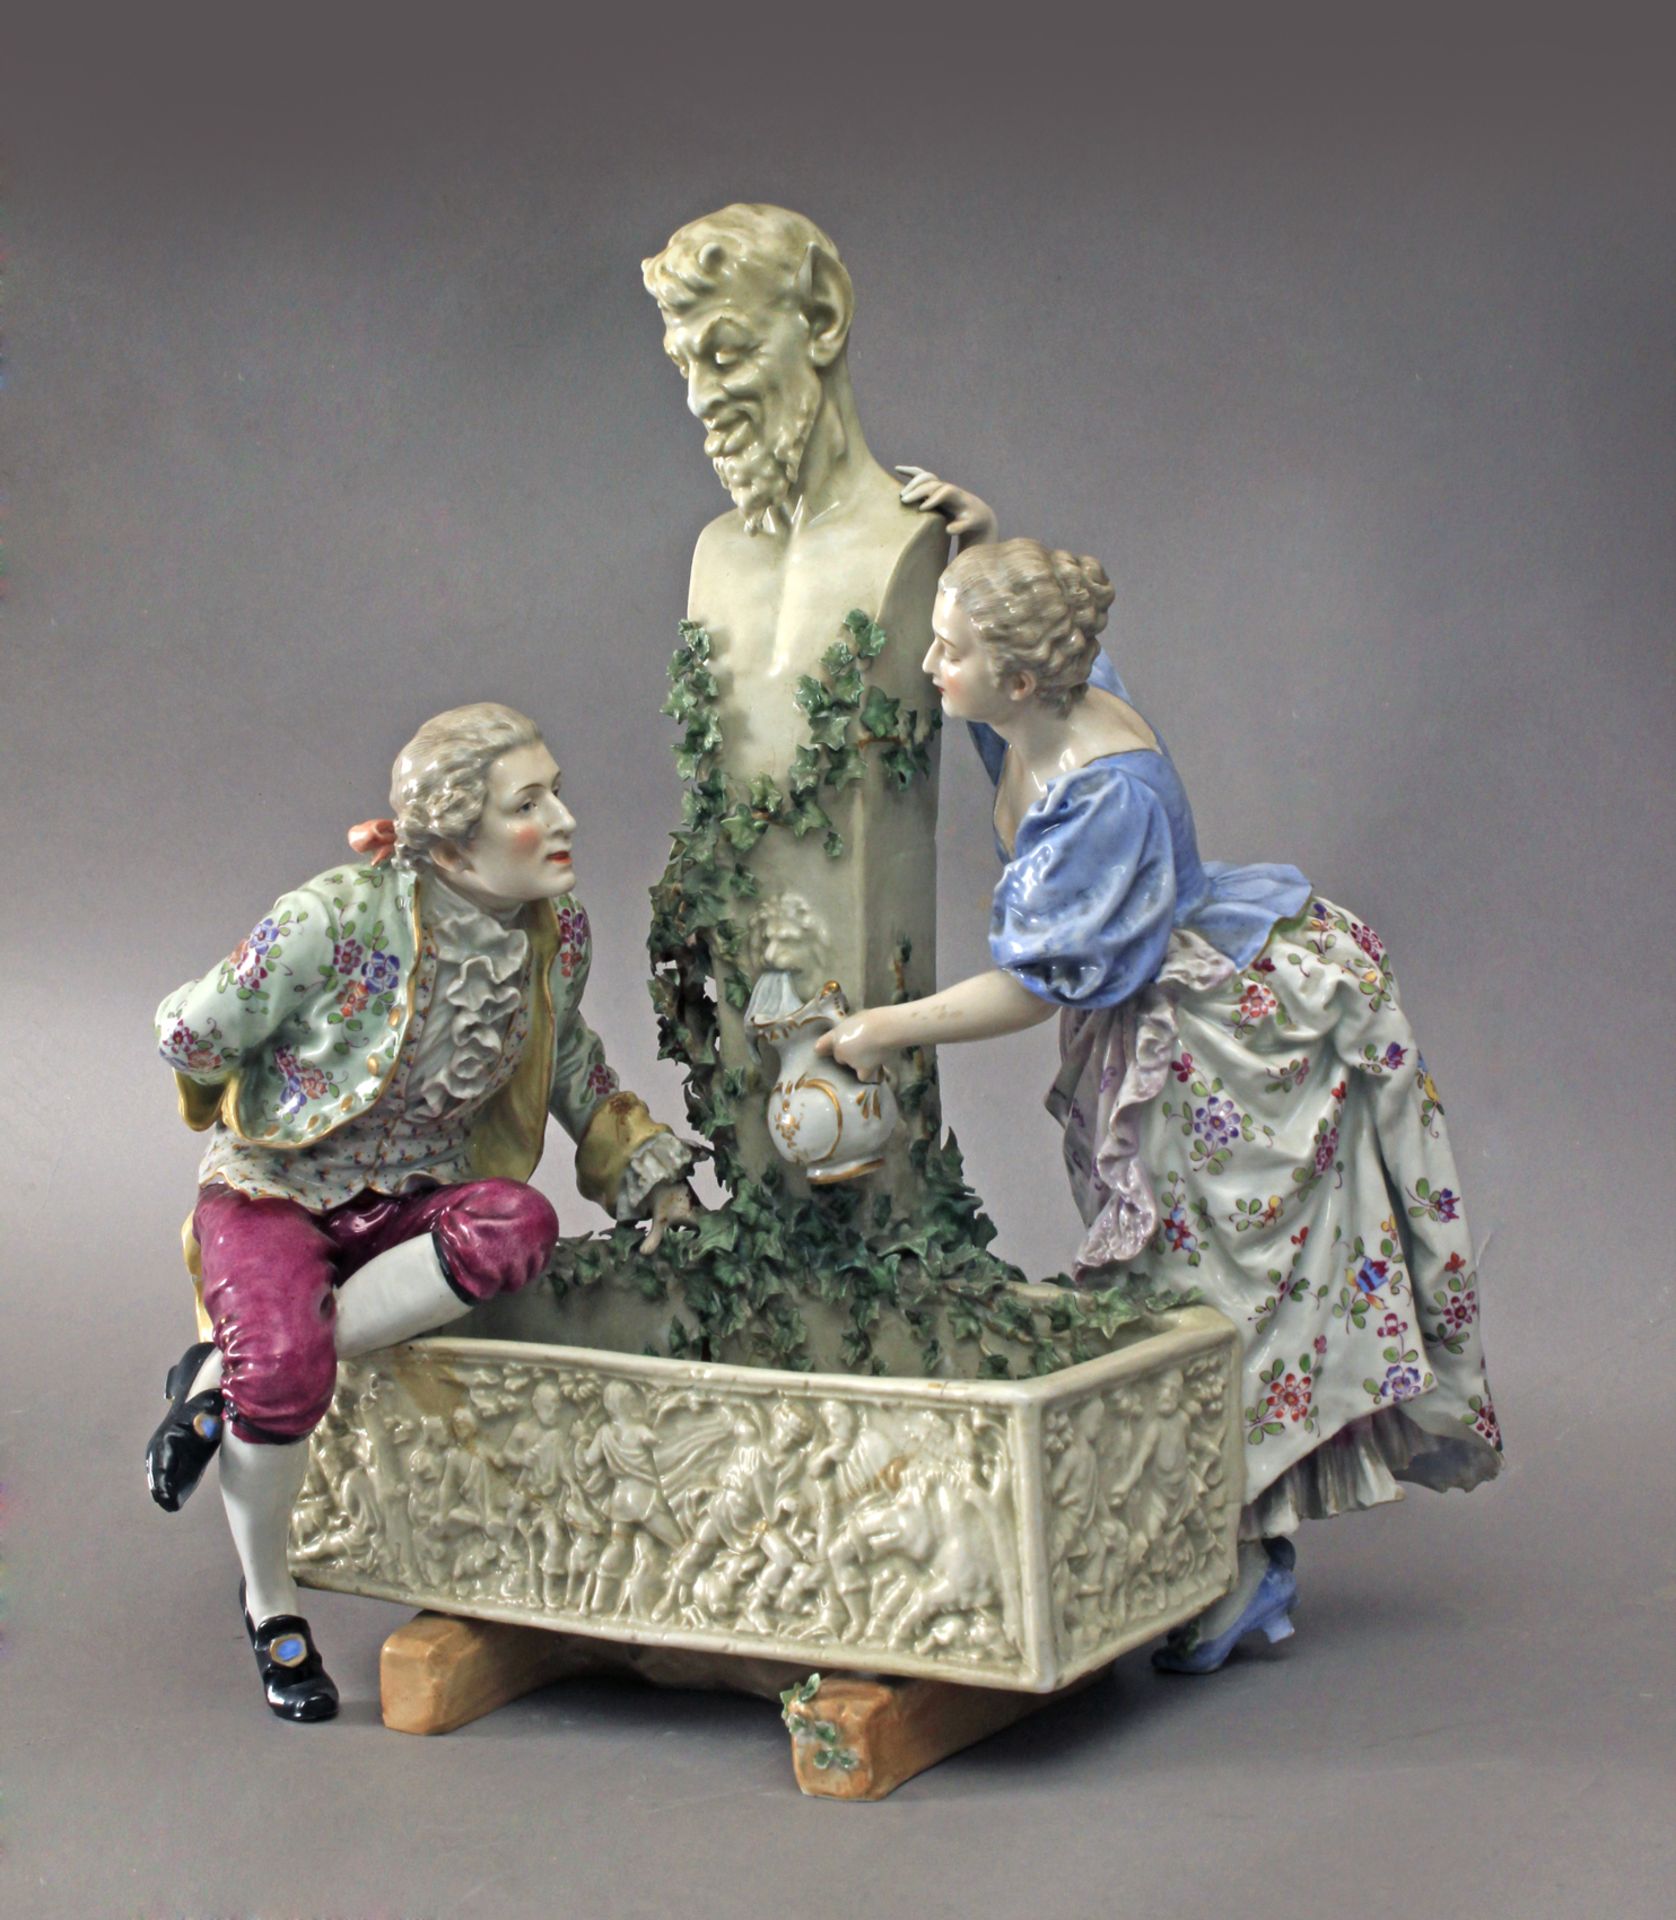 First half of 20th century group of porcelain figurines, Germany